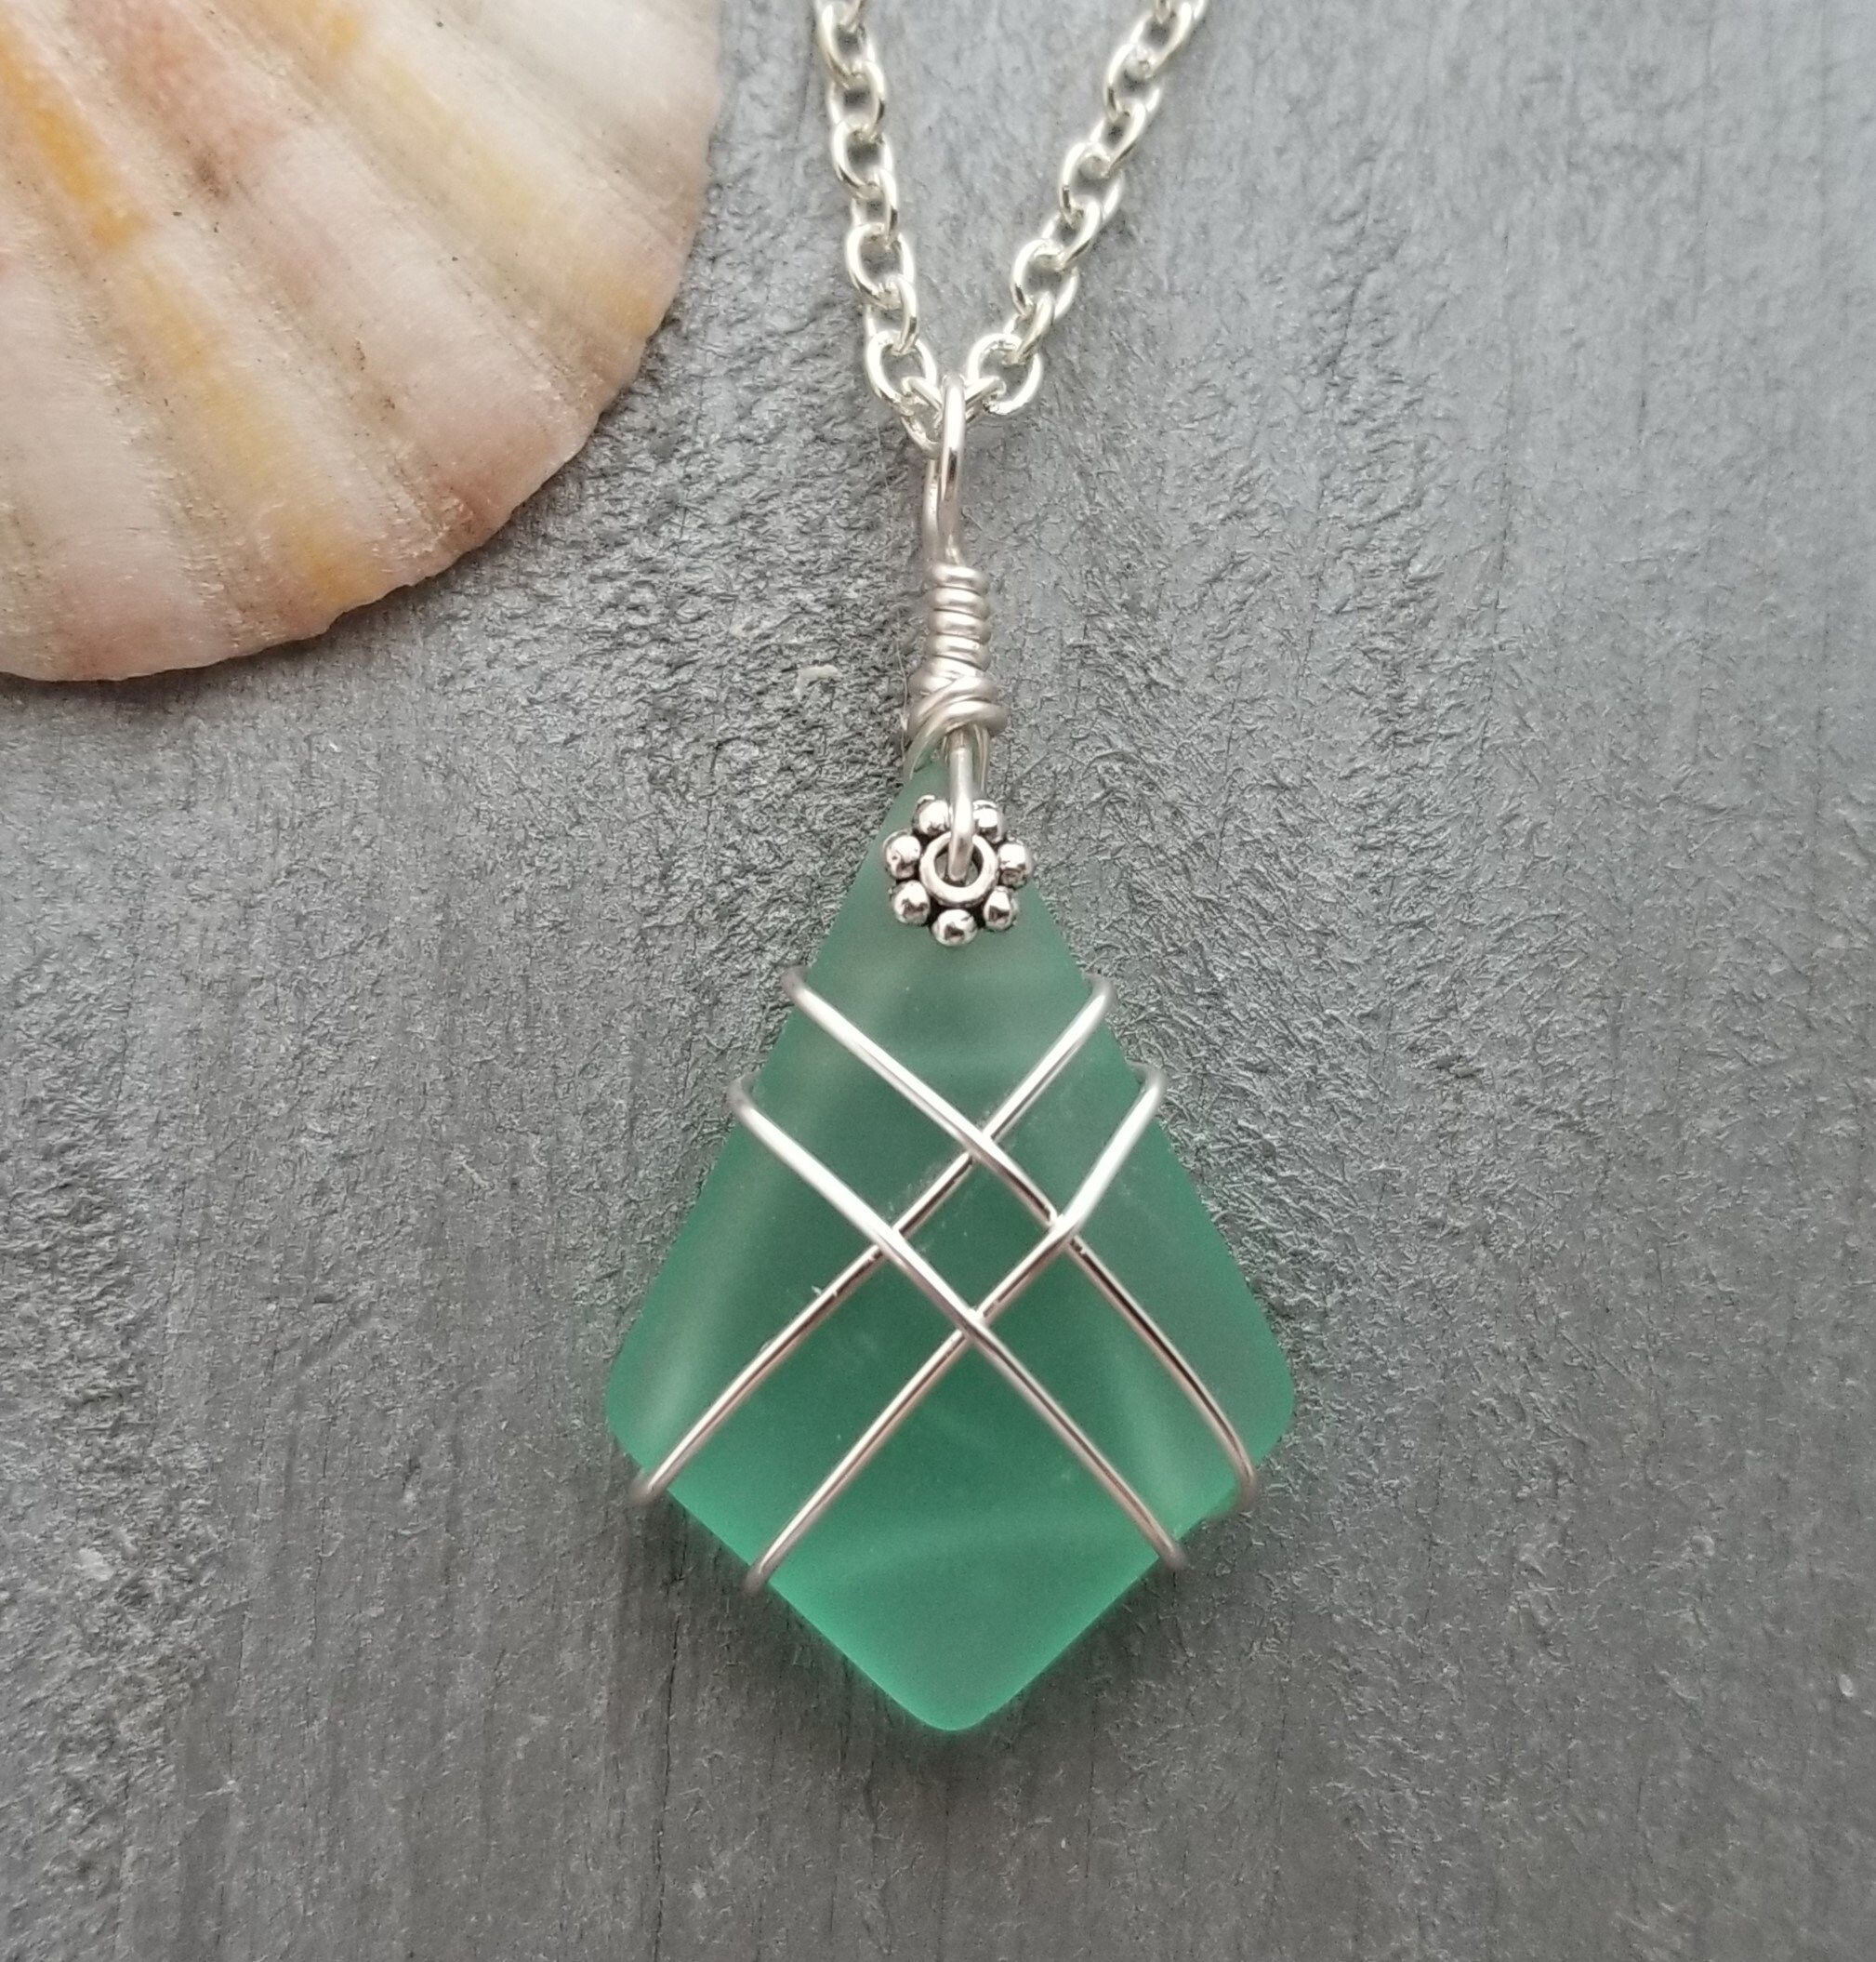 Trendy designs to choose in glass necklaces